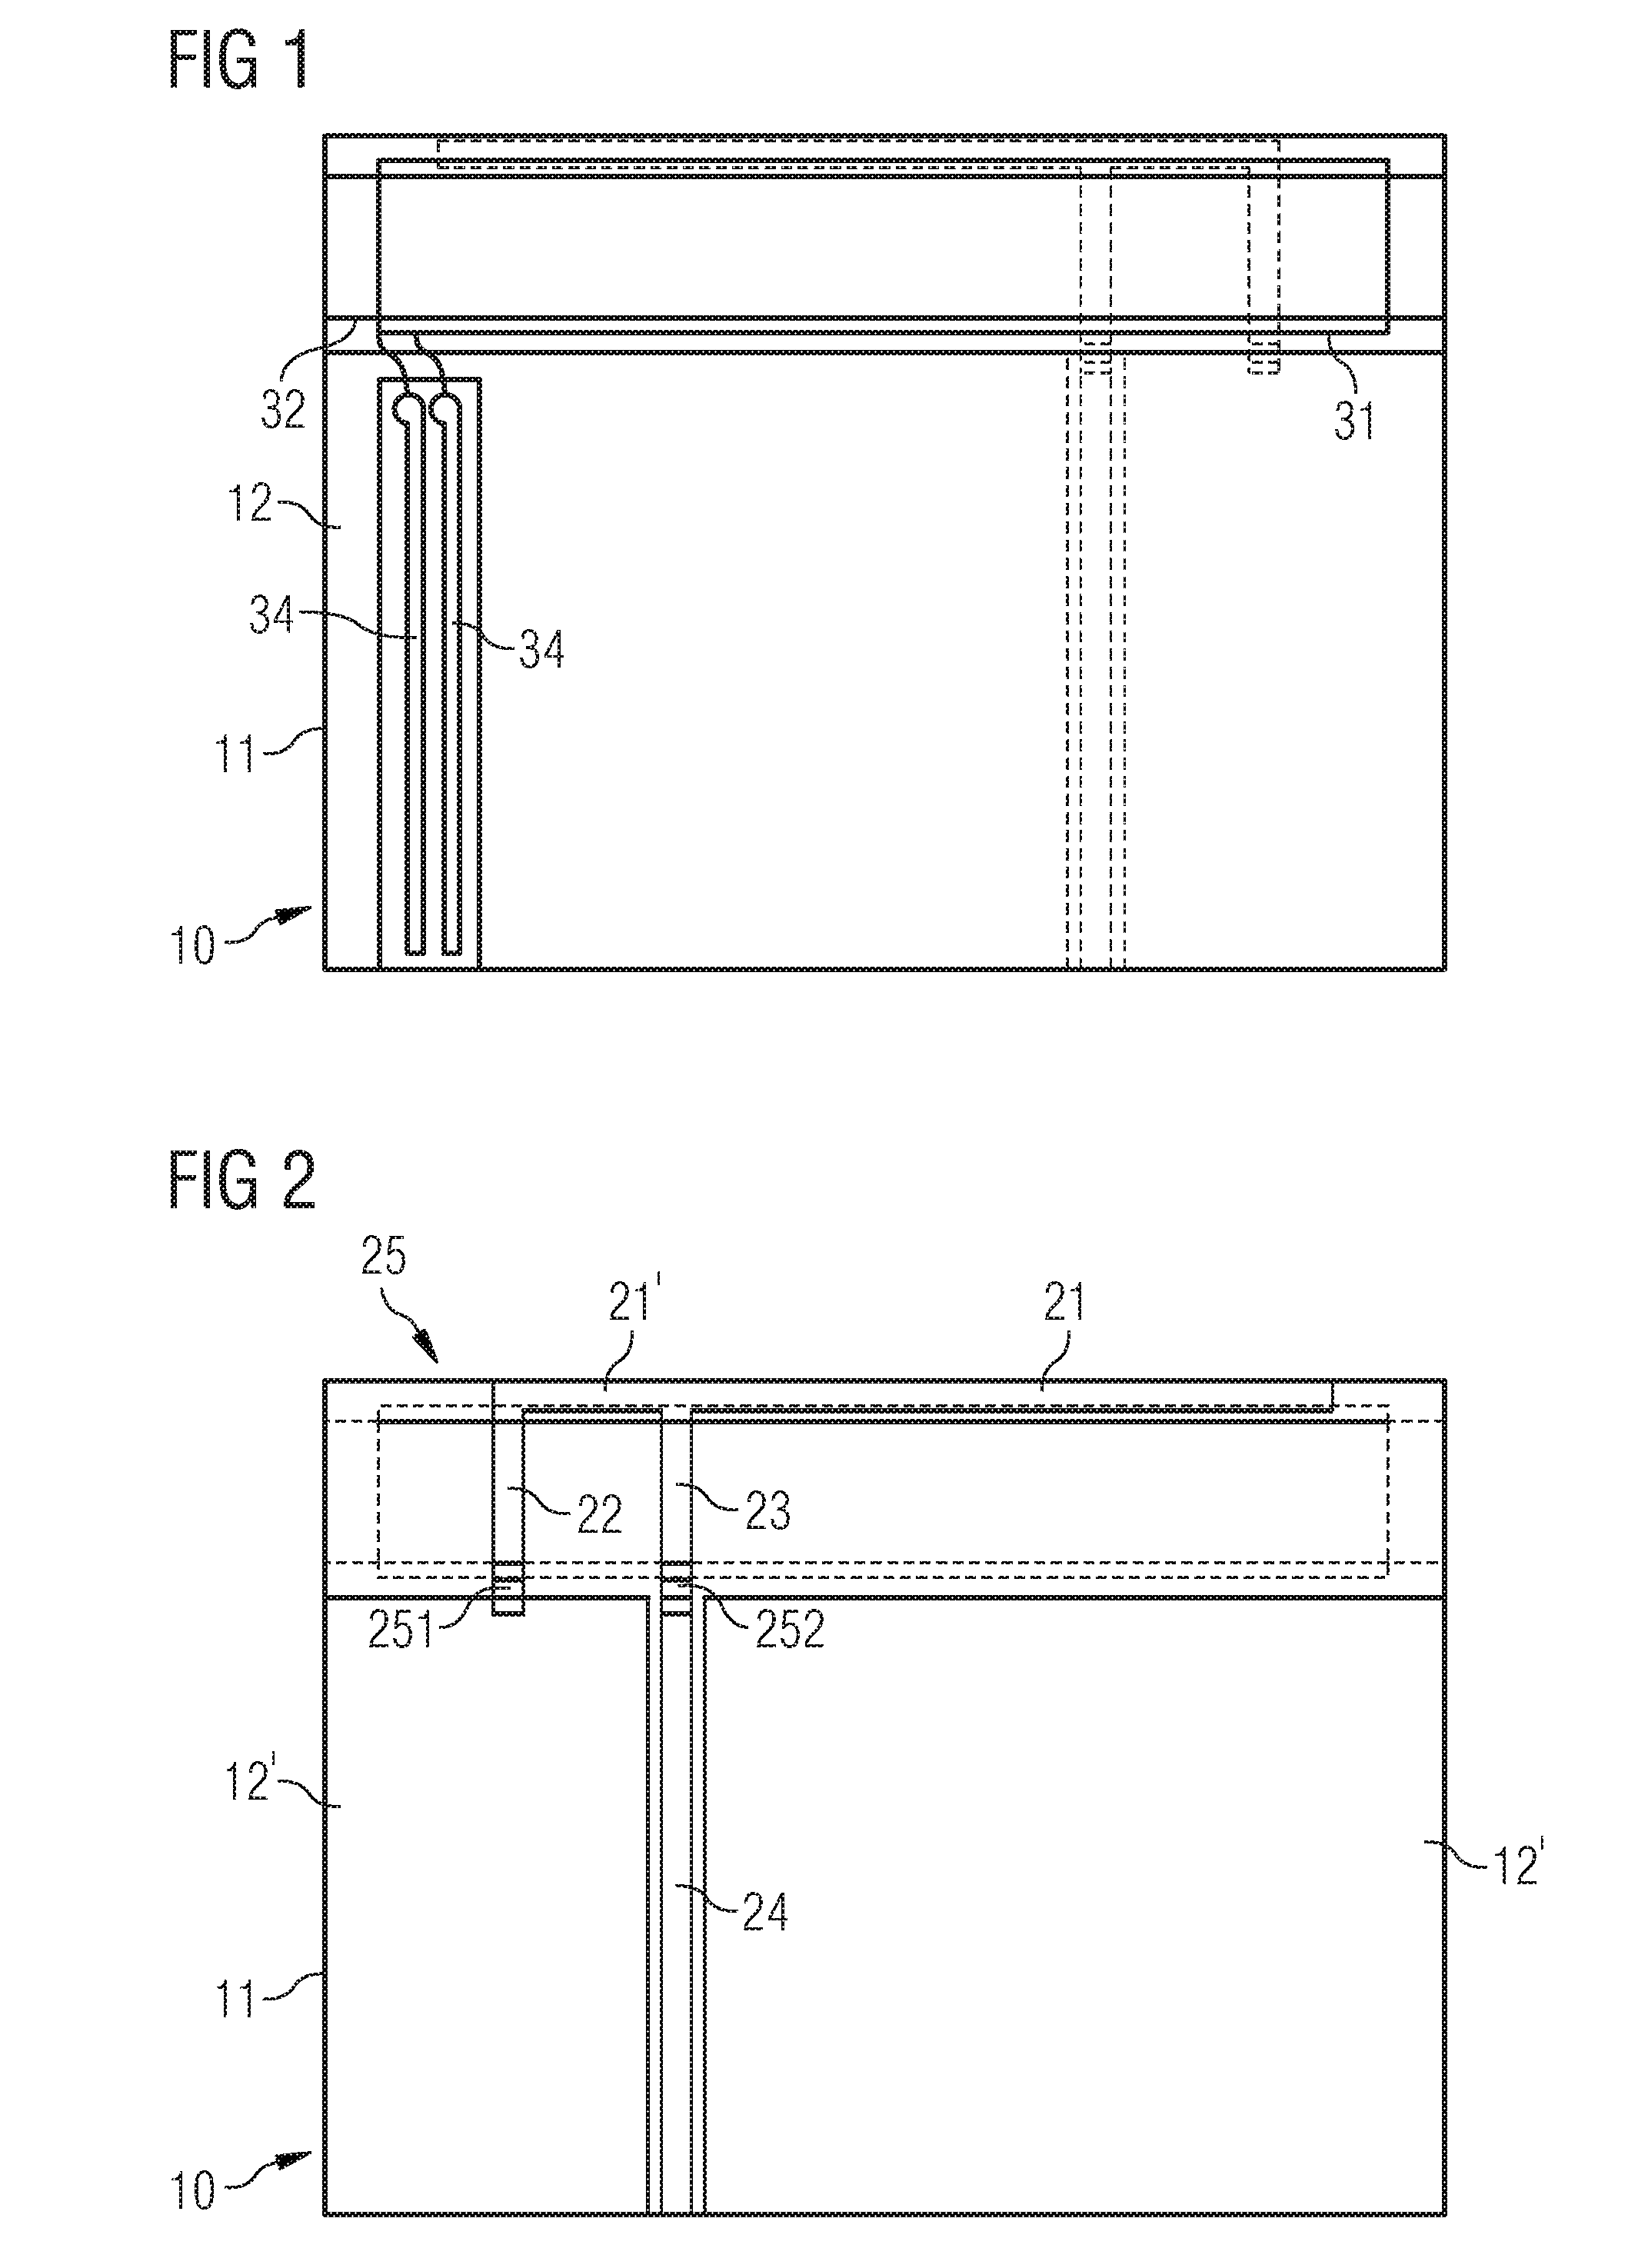 Antenna arrangement for hearing device applications